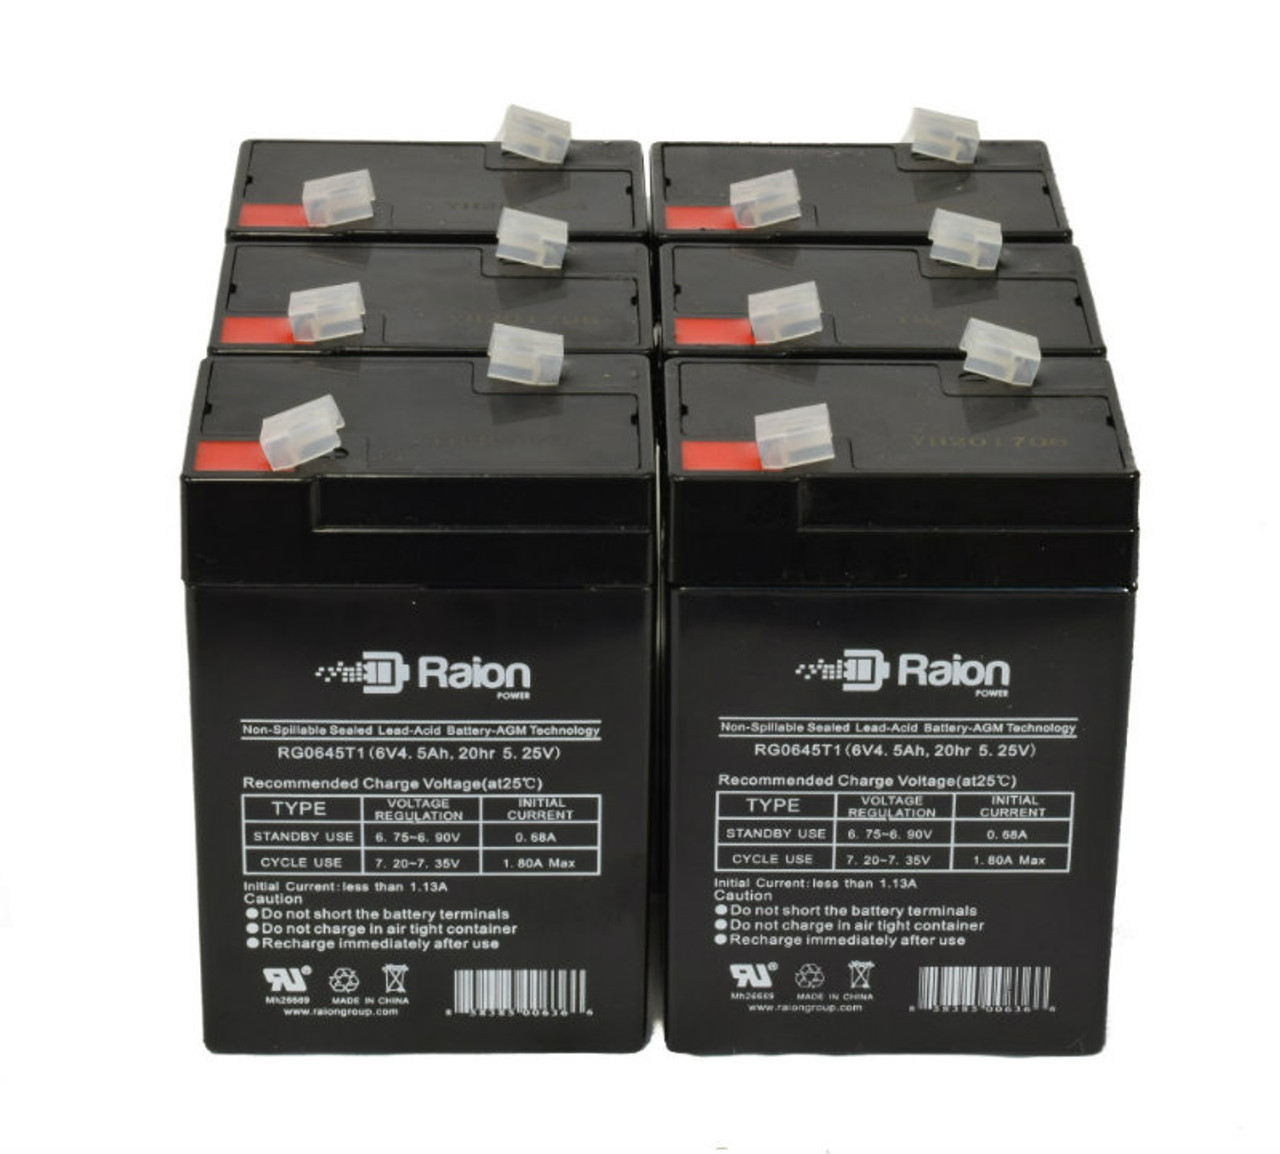 Raion Power 6 Volt 4.5Ah RG0645T1 Replacement Battery for Genesis NP4.5-6 - 6 Pack